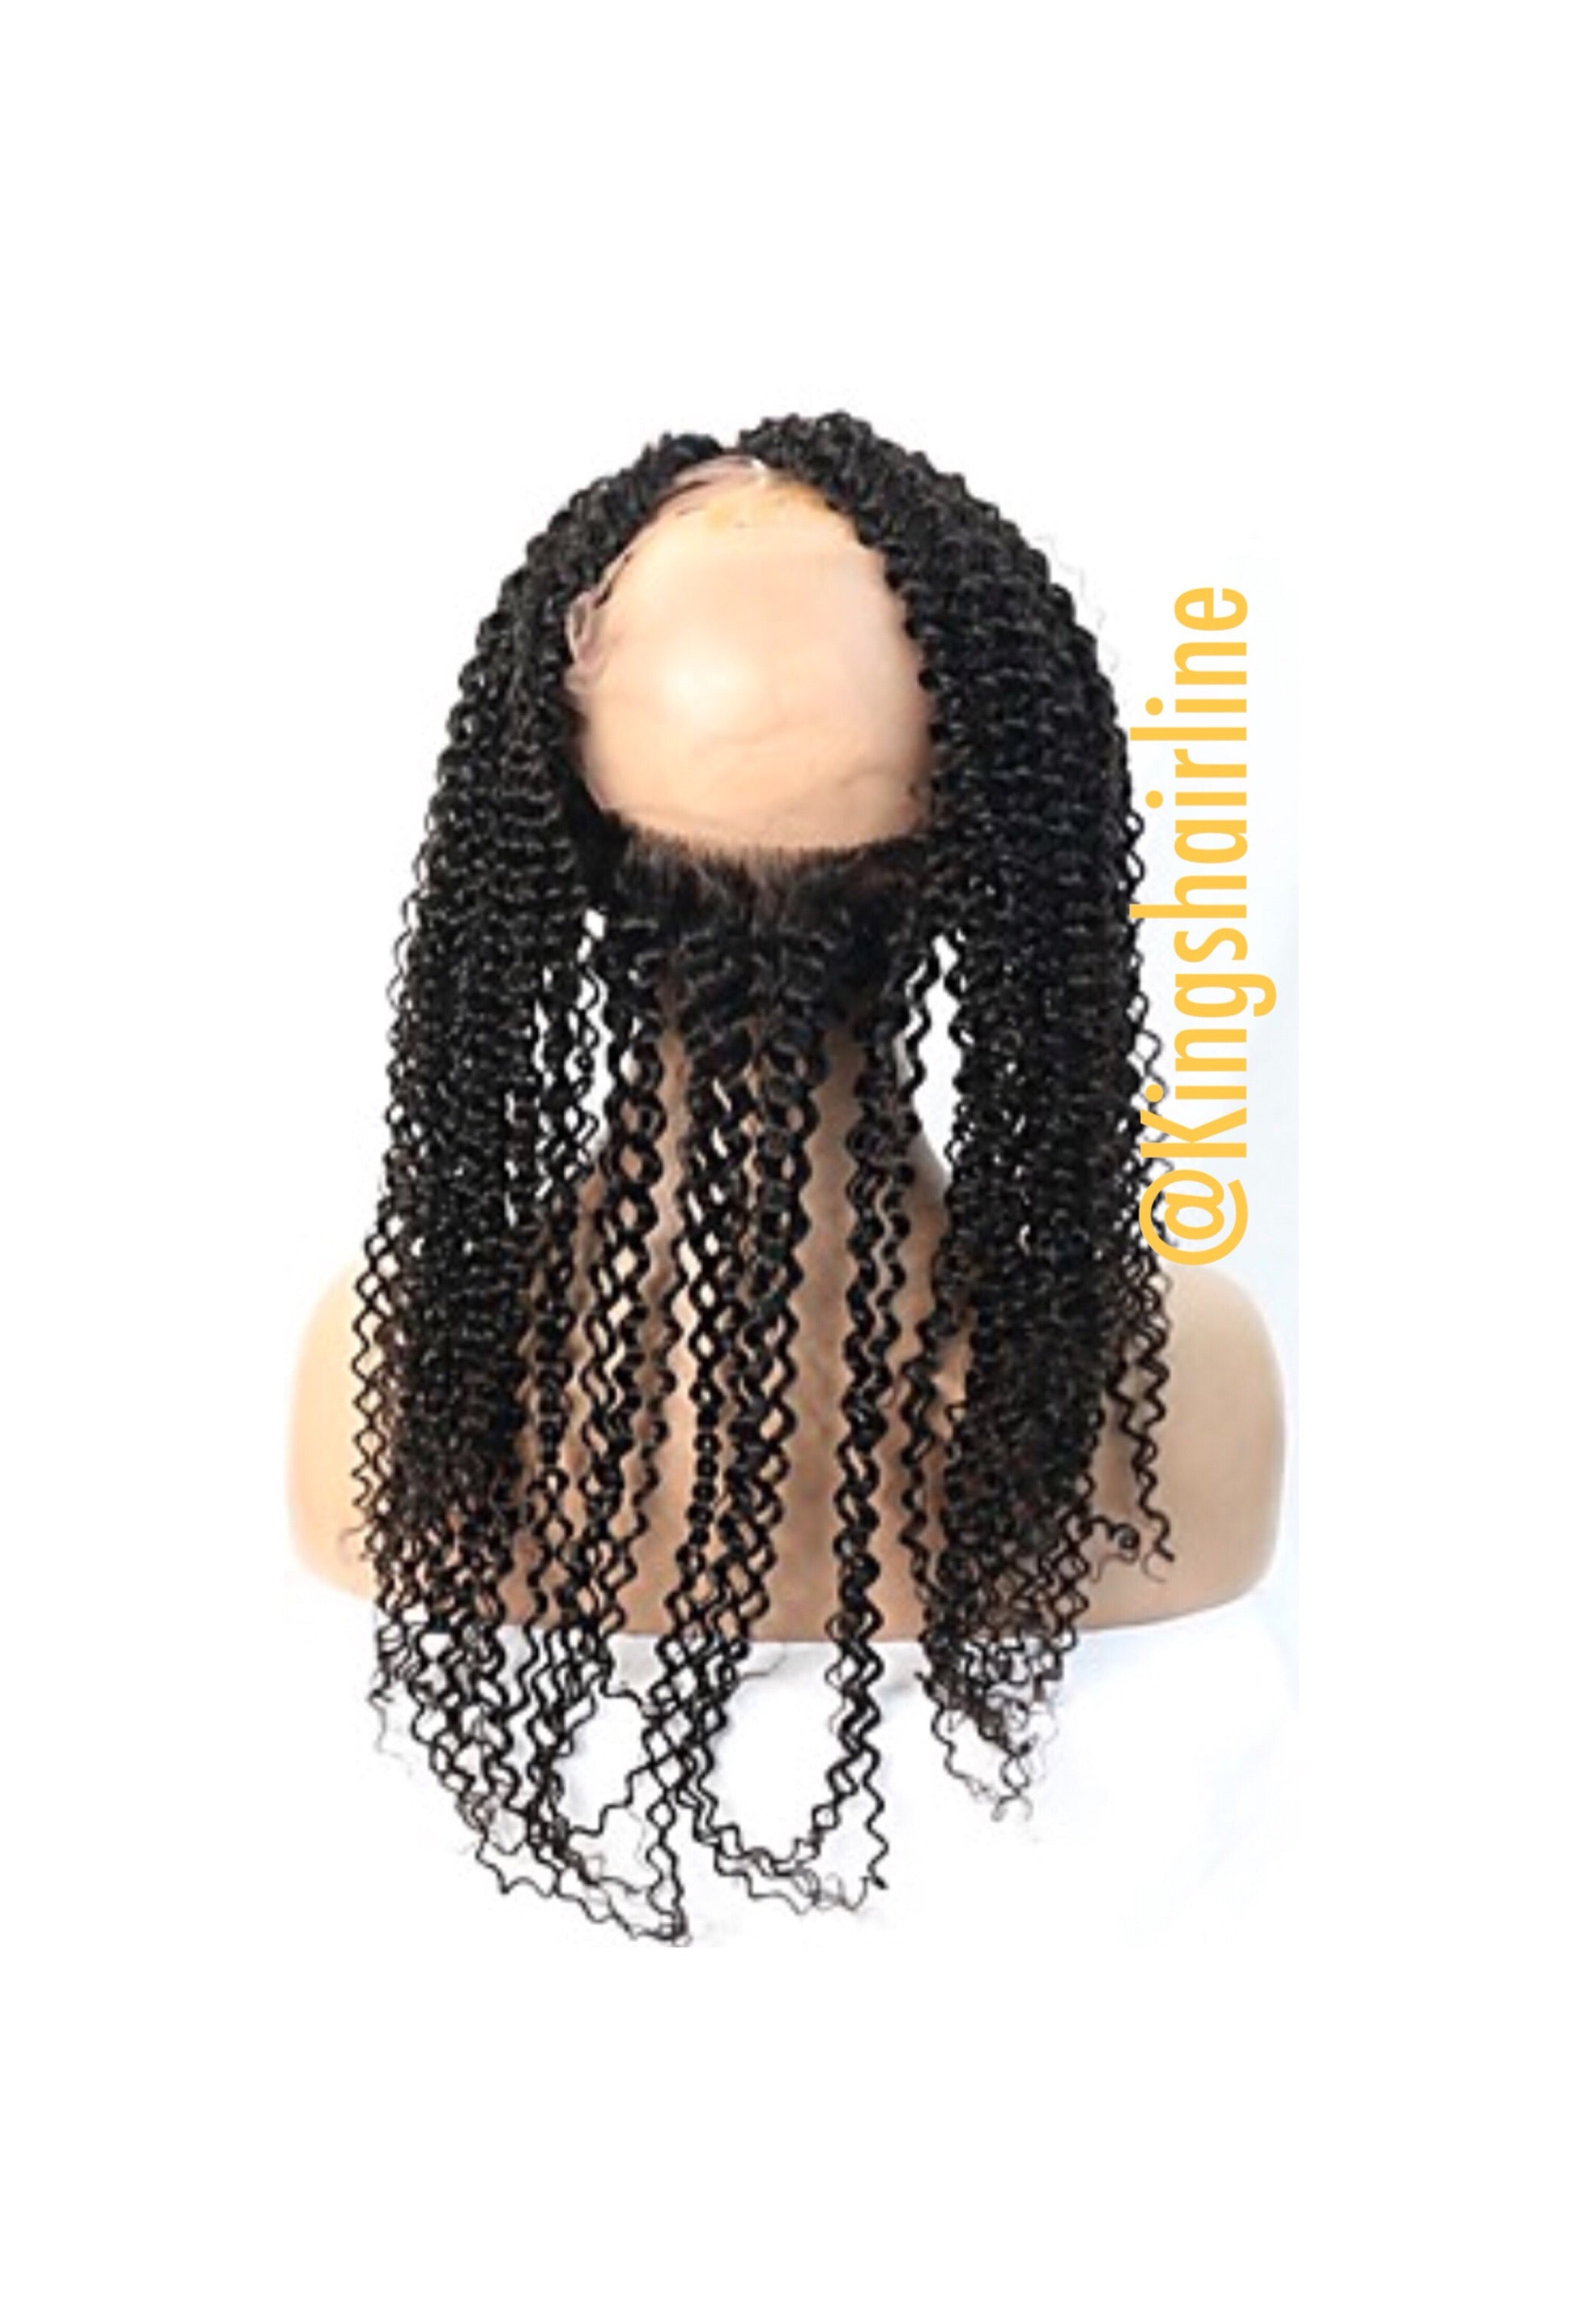 Queen Lace Wigs